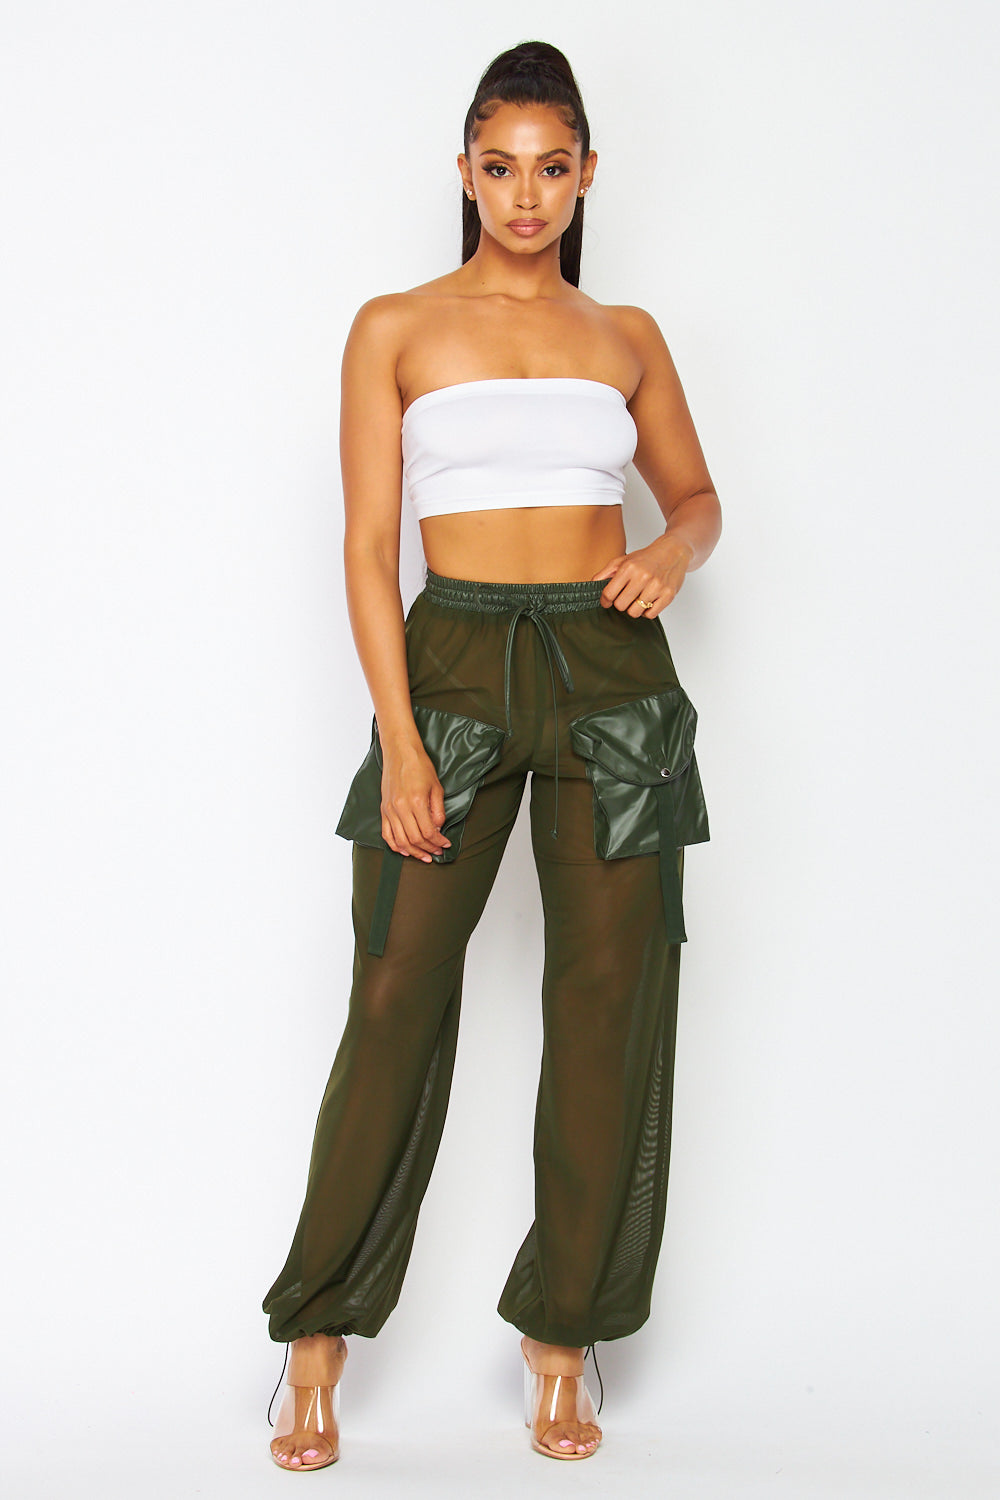 Genie Mesh and Leather Jogger Cargo Pocket Pant